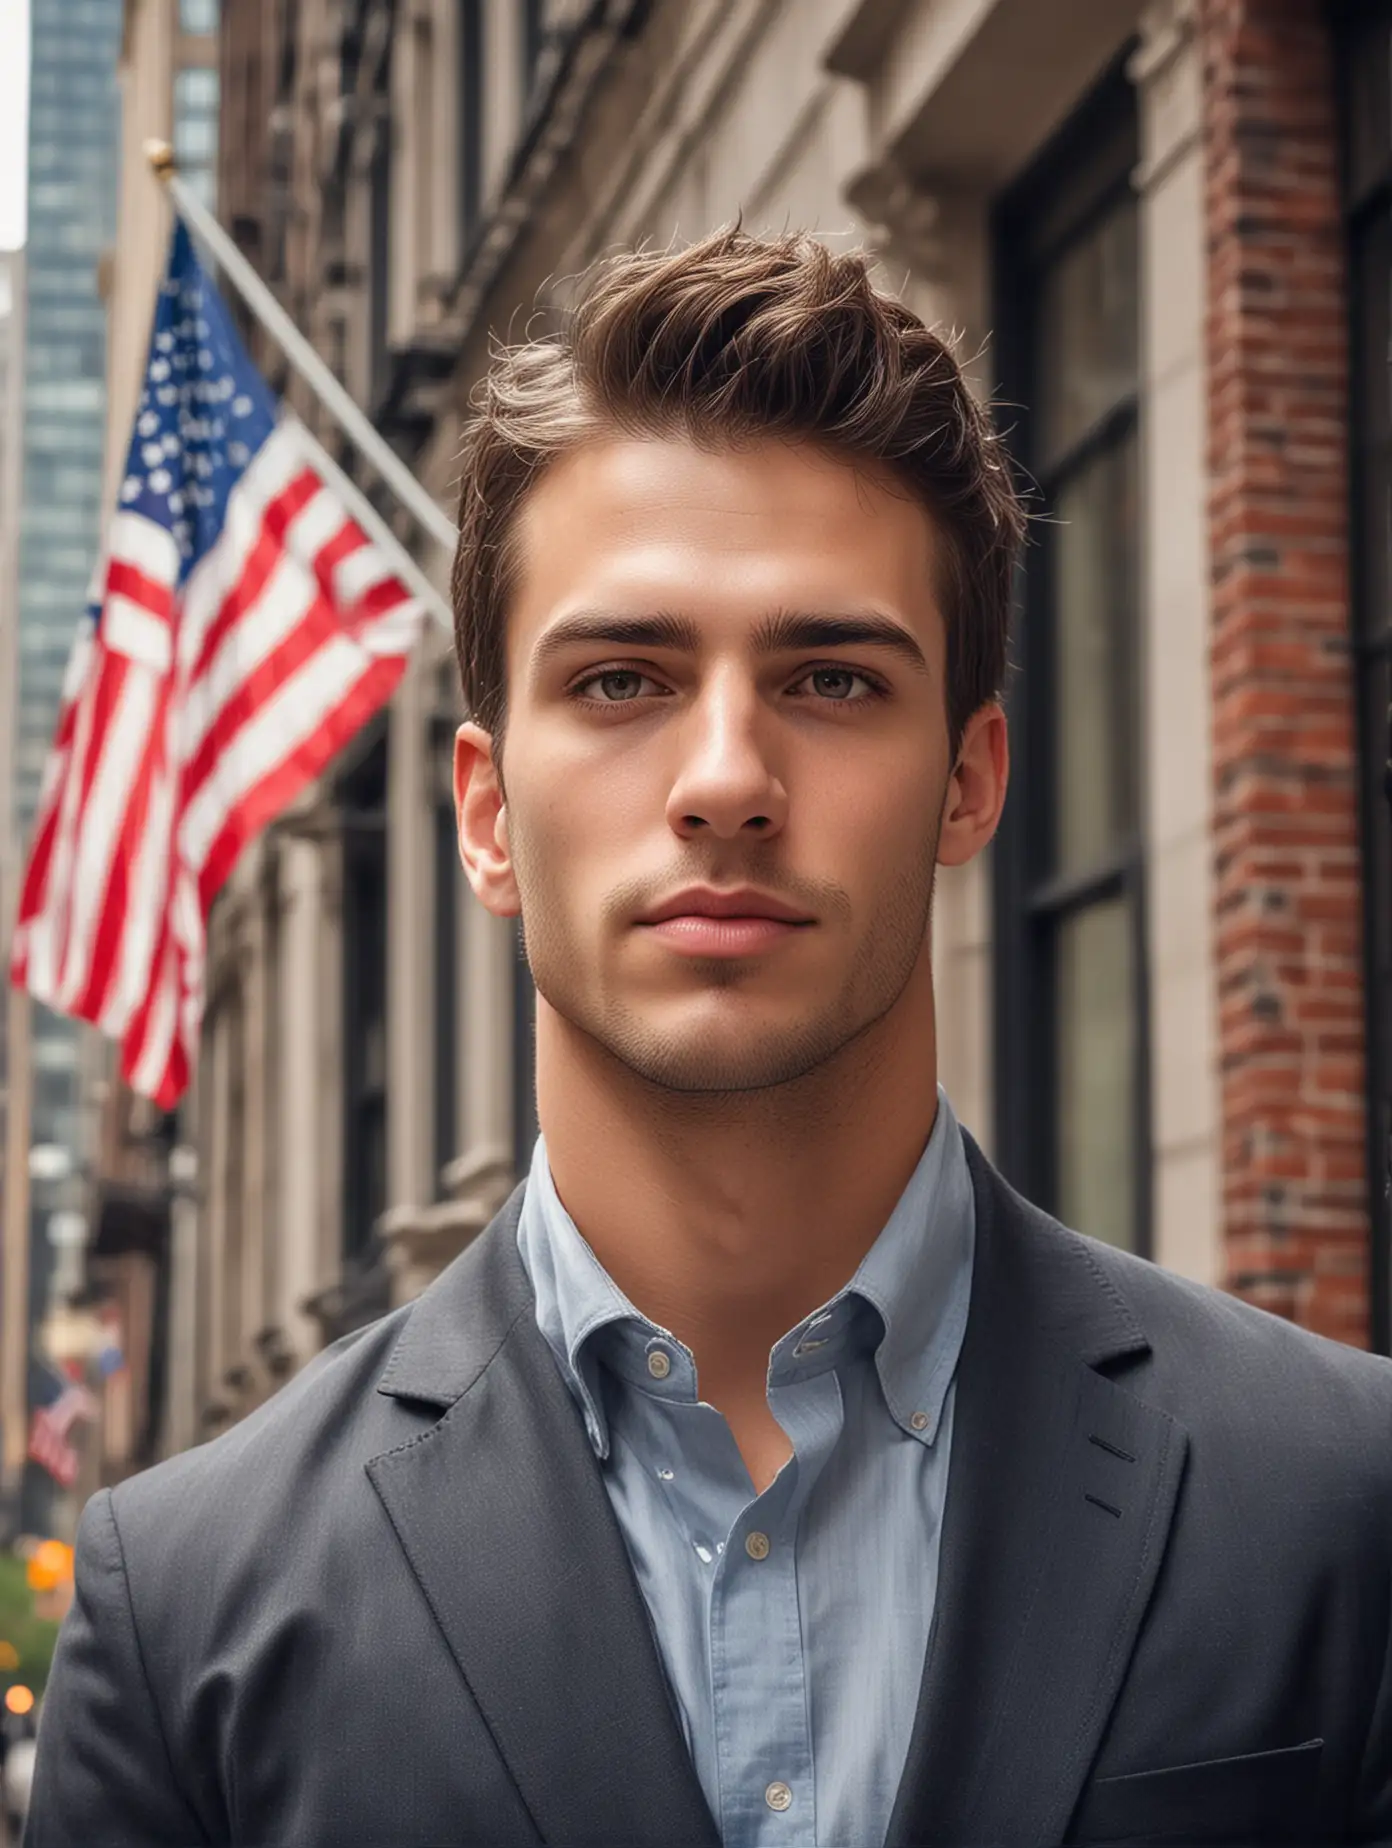 Handsome American Man in New York City with Exquisite Features and Flag Background